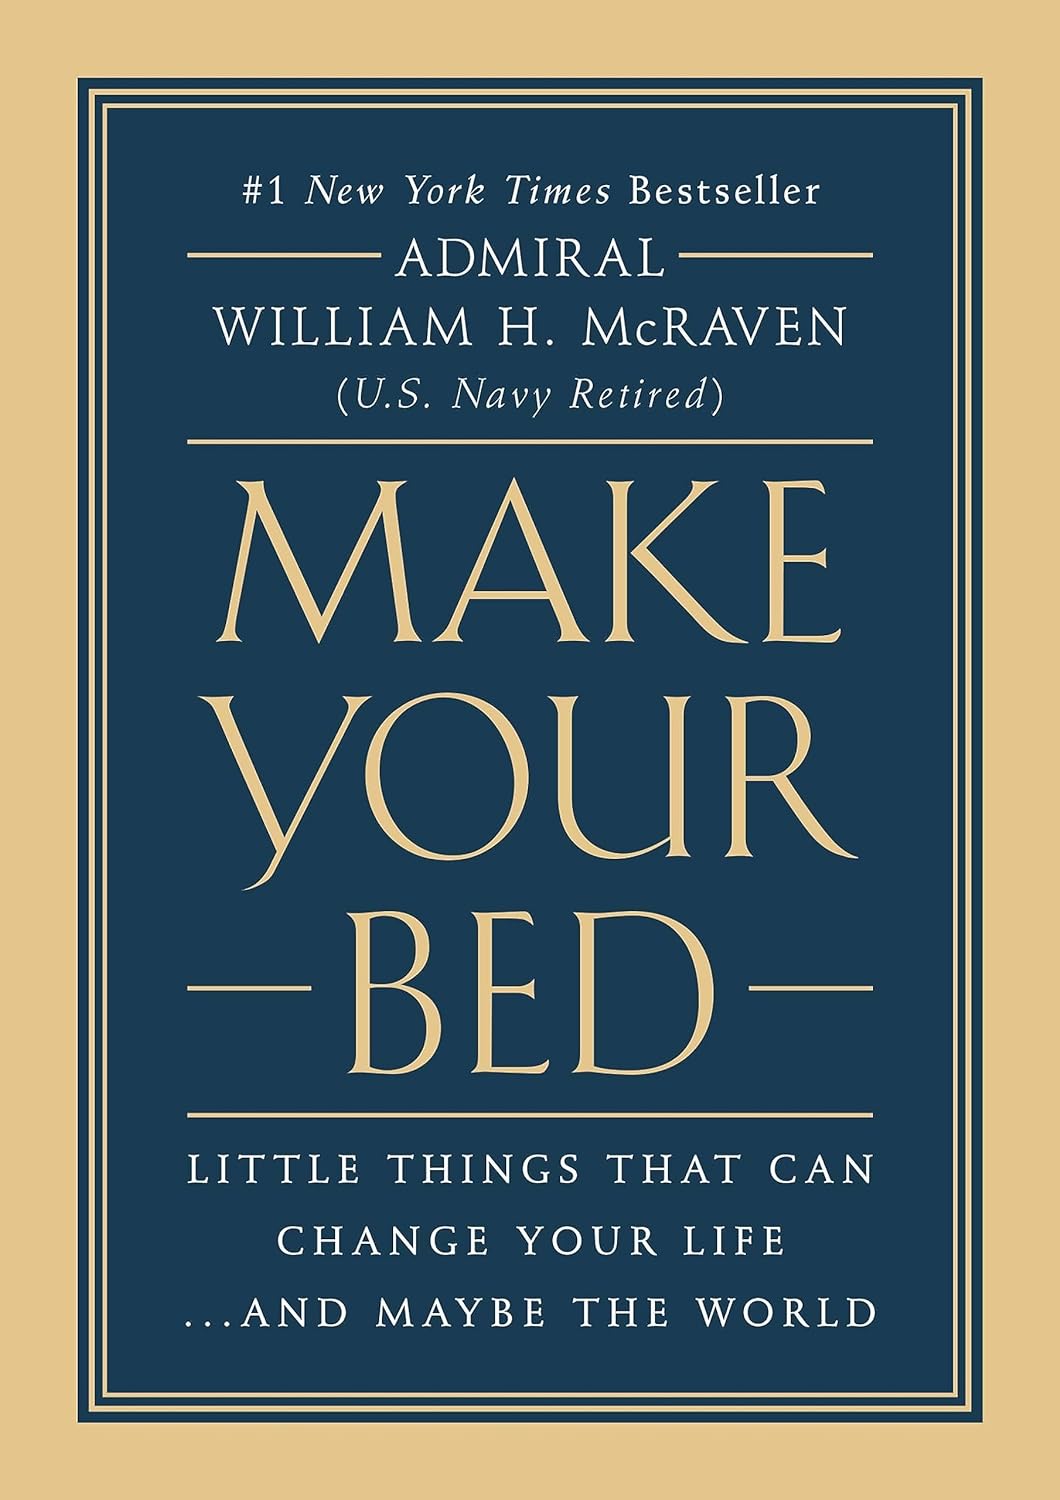 Make Your Bed Book Summary